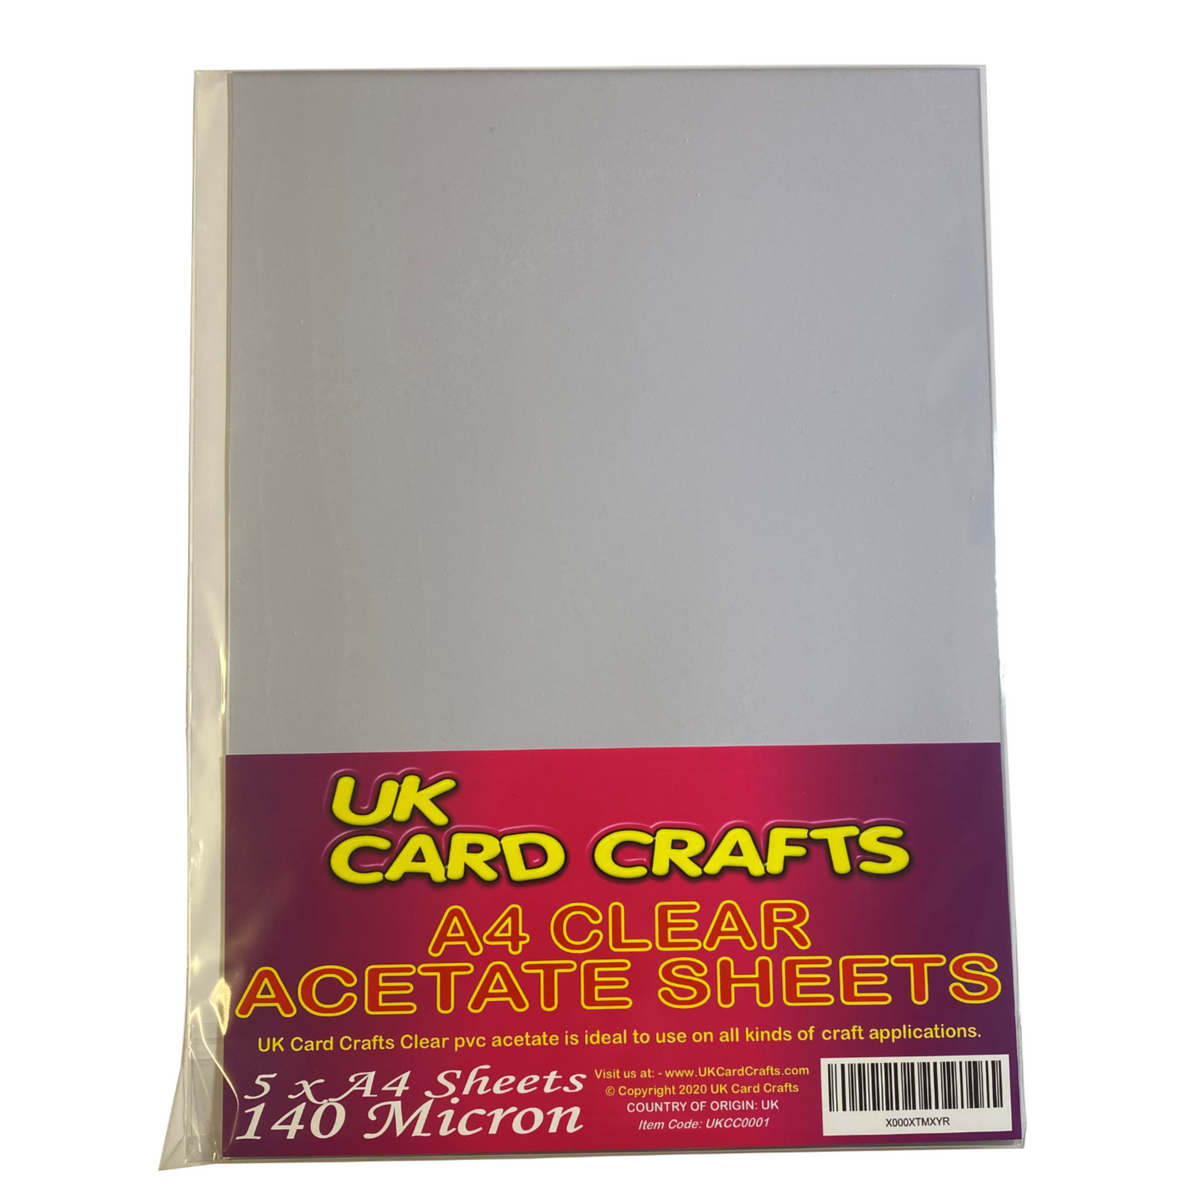 A4 Clear Acetate - 5 sheets per pack, 140 micron thick – UK Card Crafts